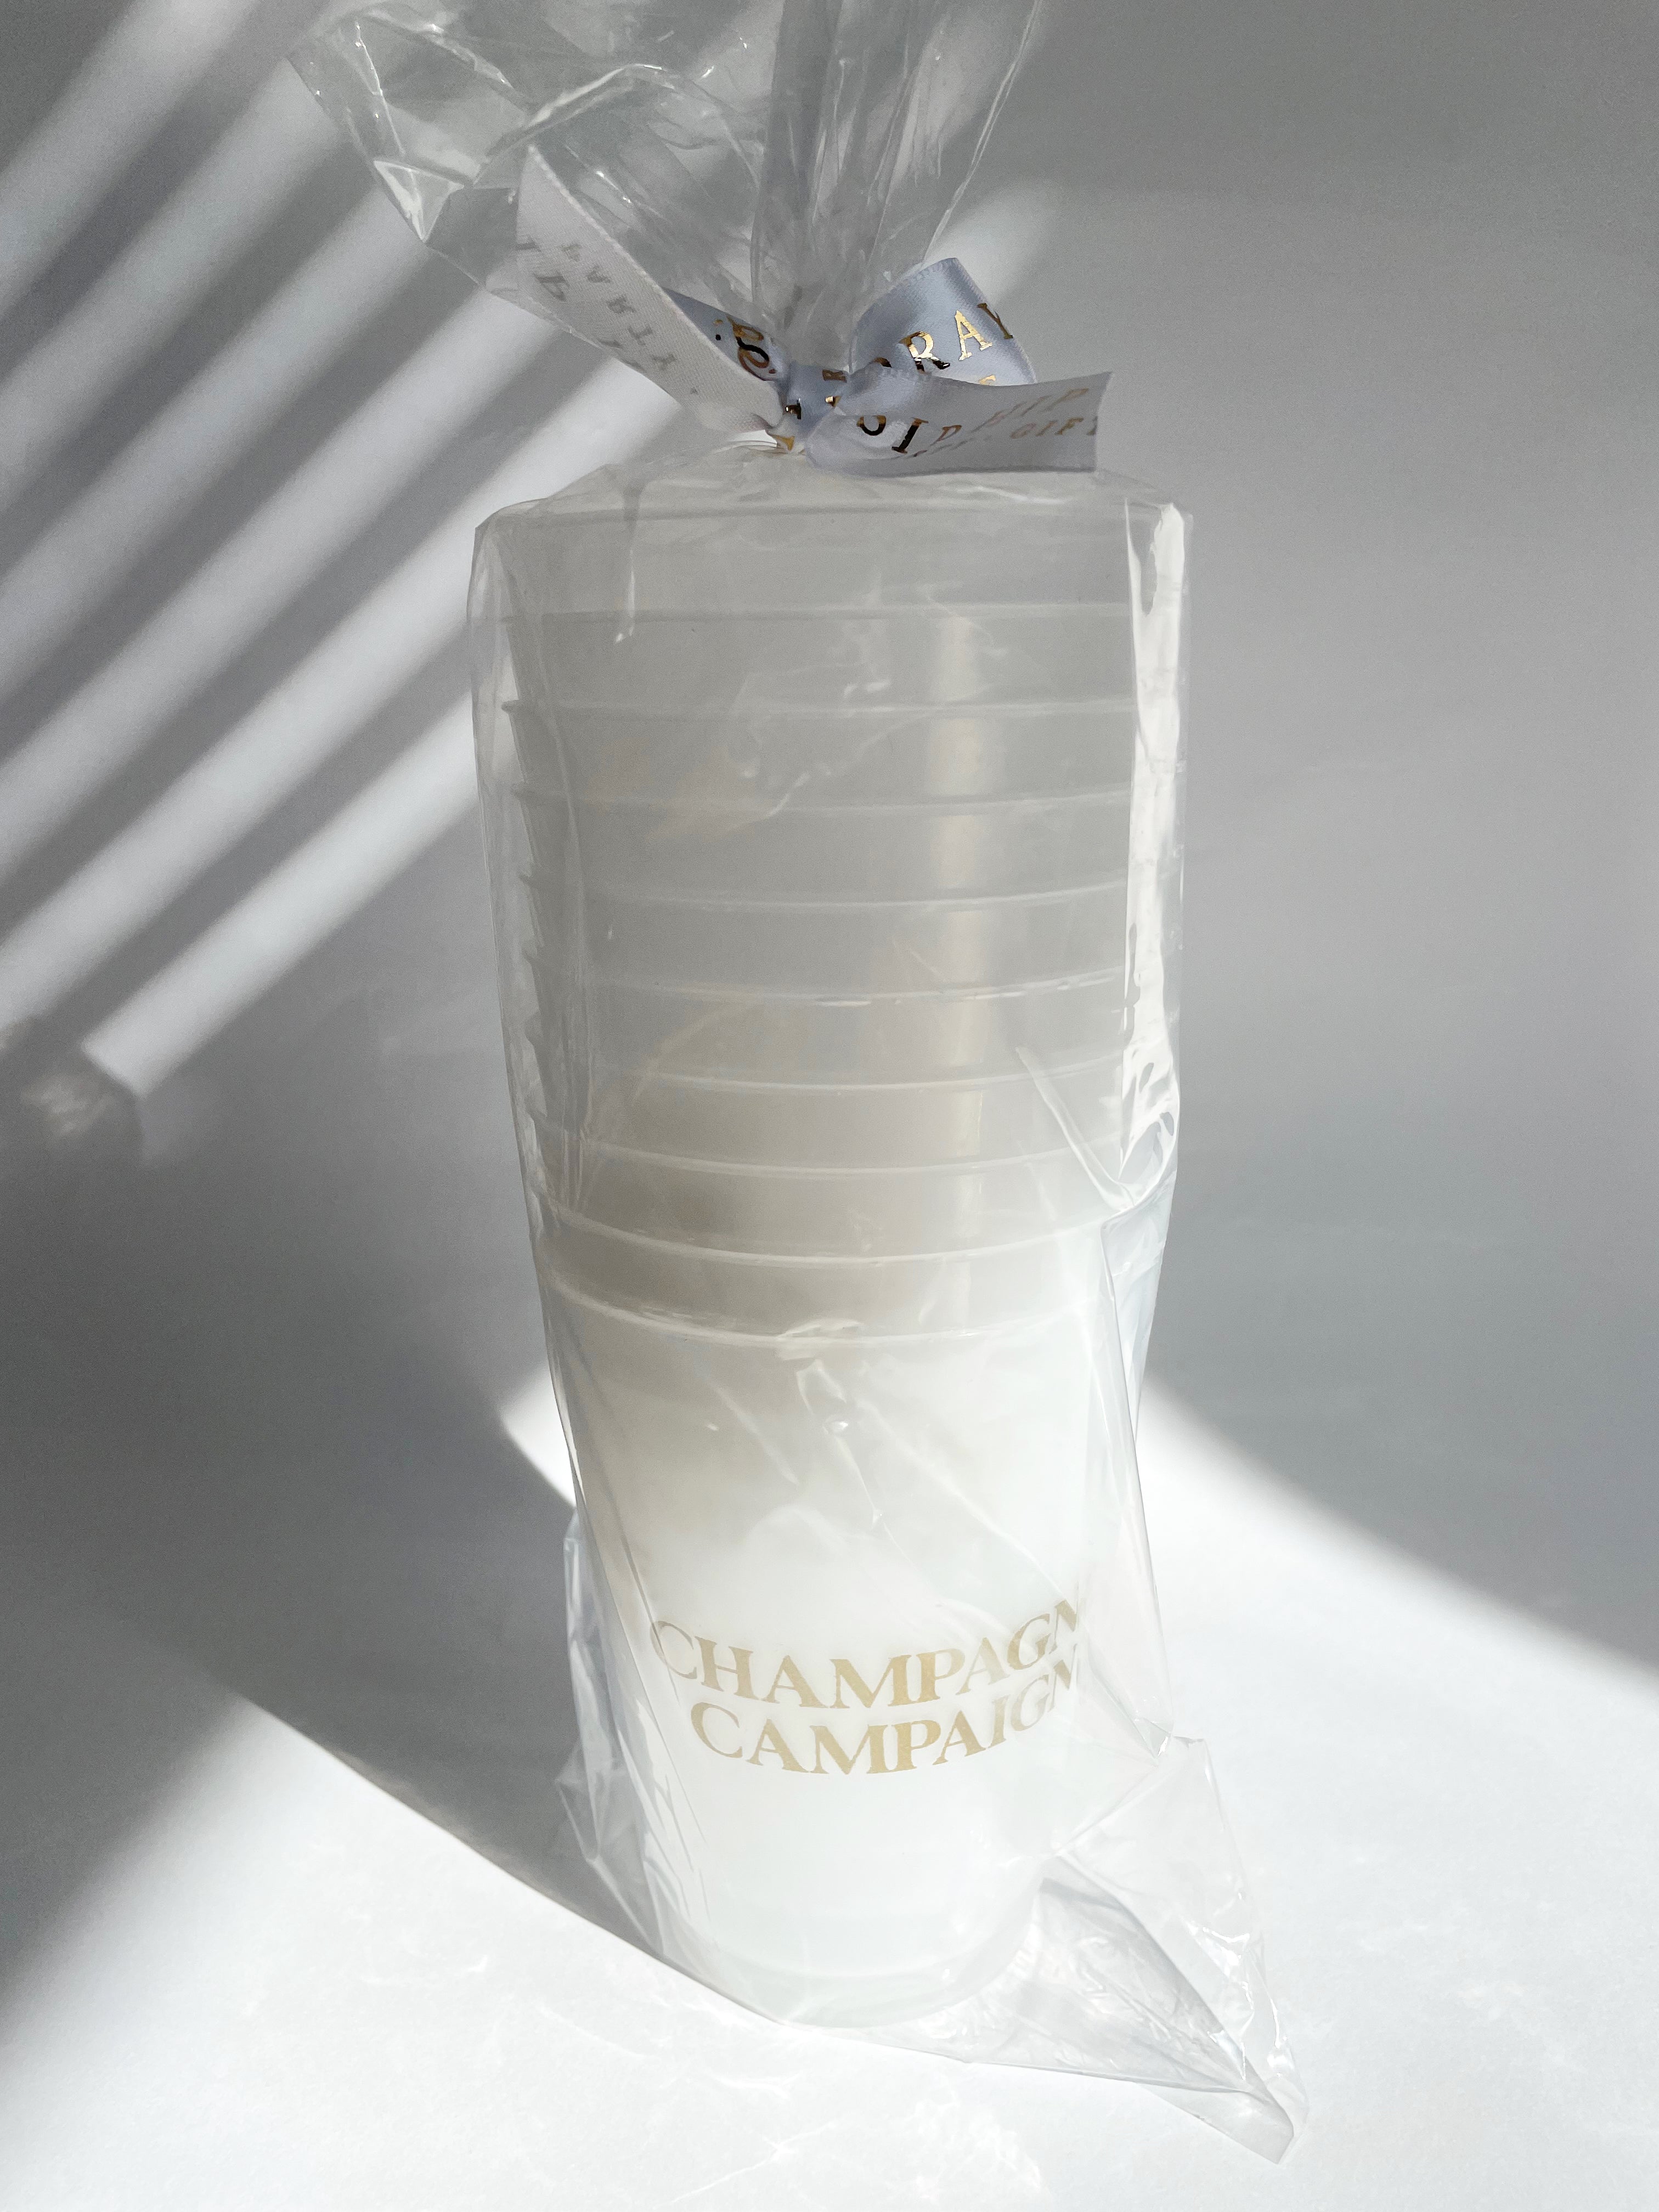 Champagne Campaign Resuable Cups